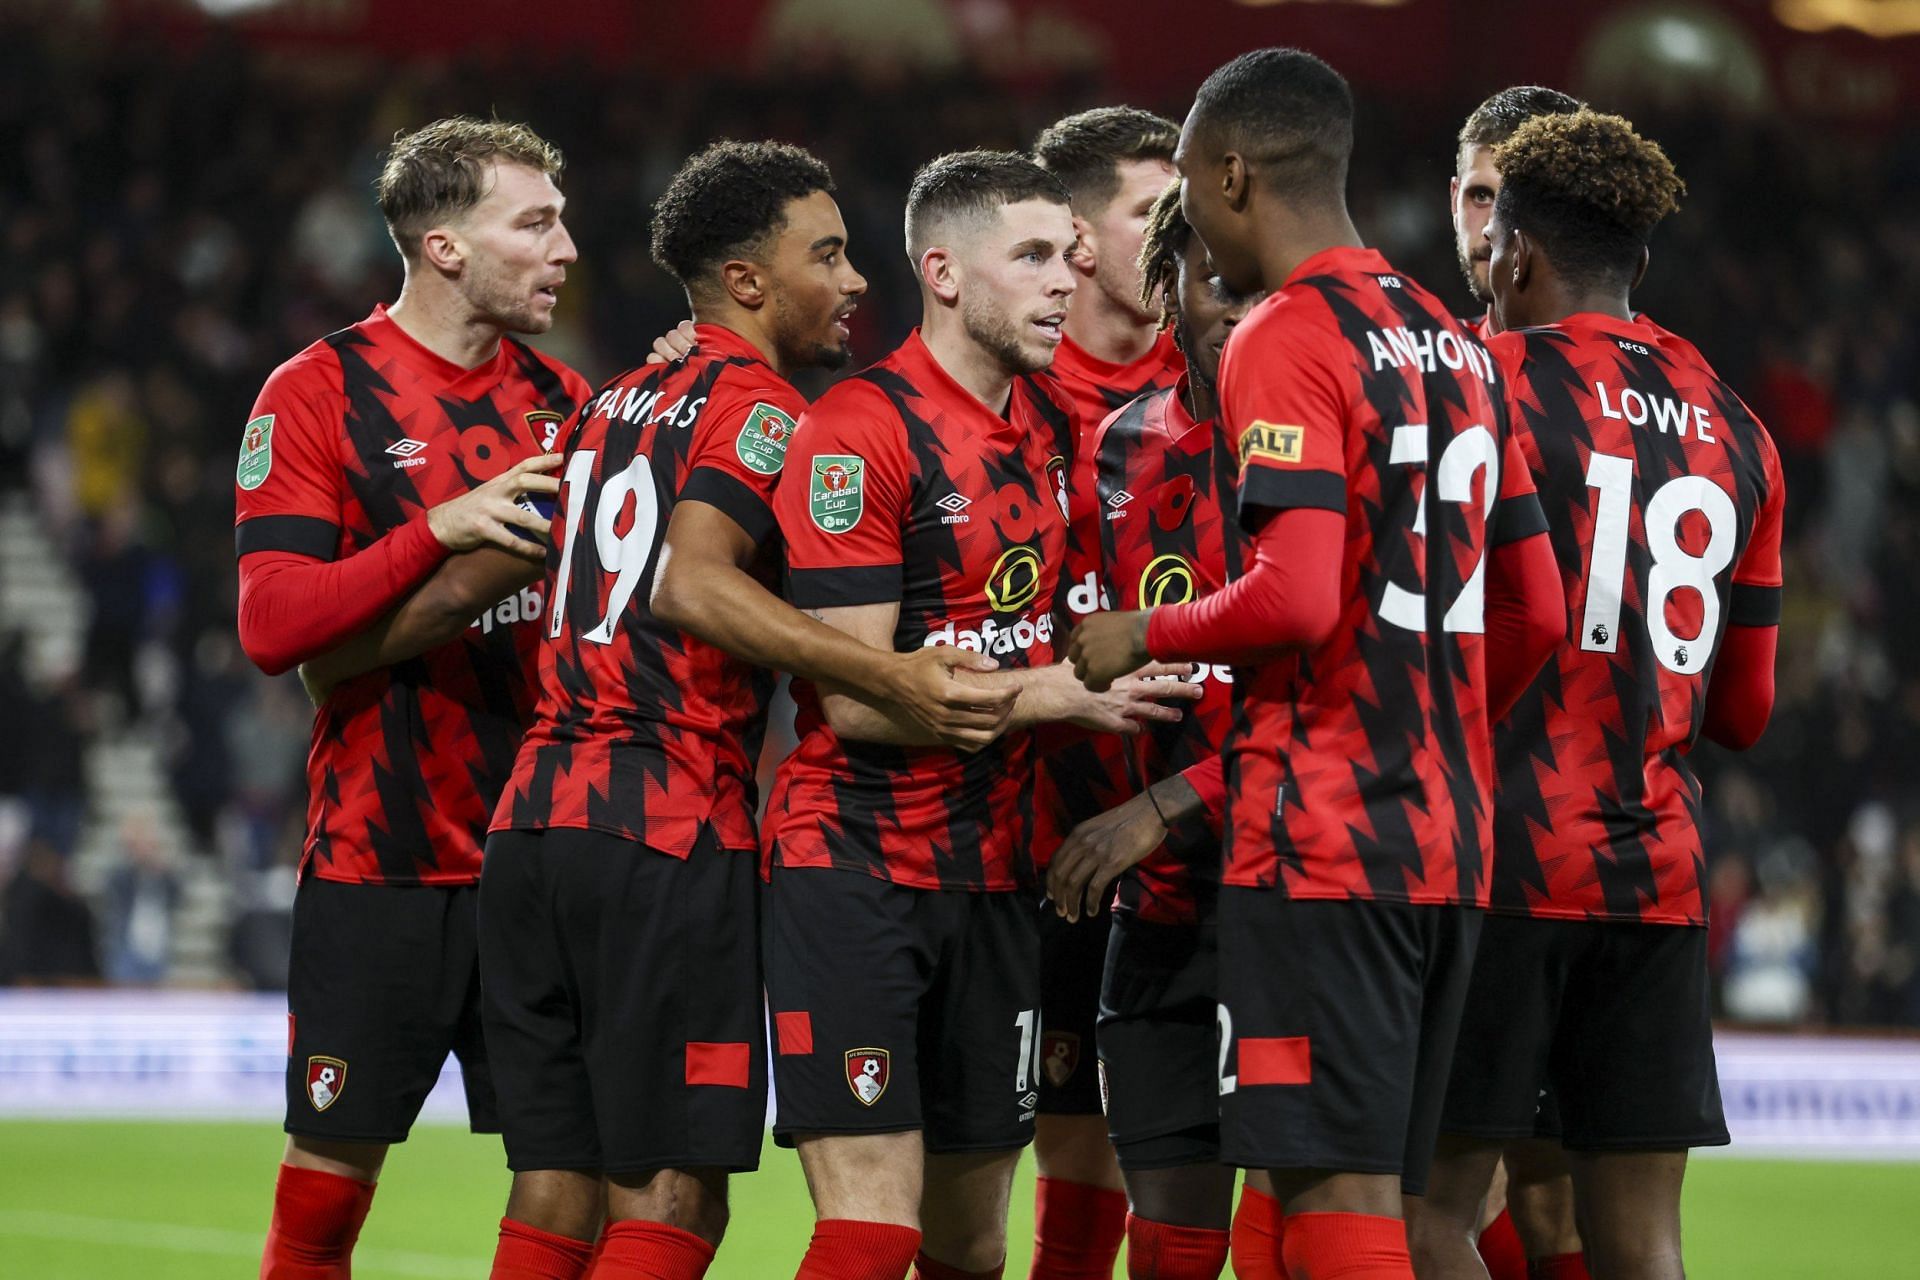 Bournemouth are looking to win back-to-back games 